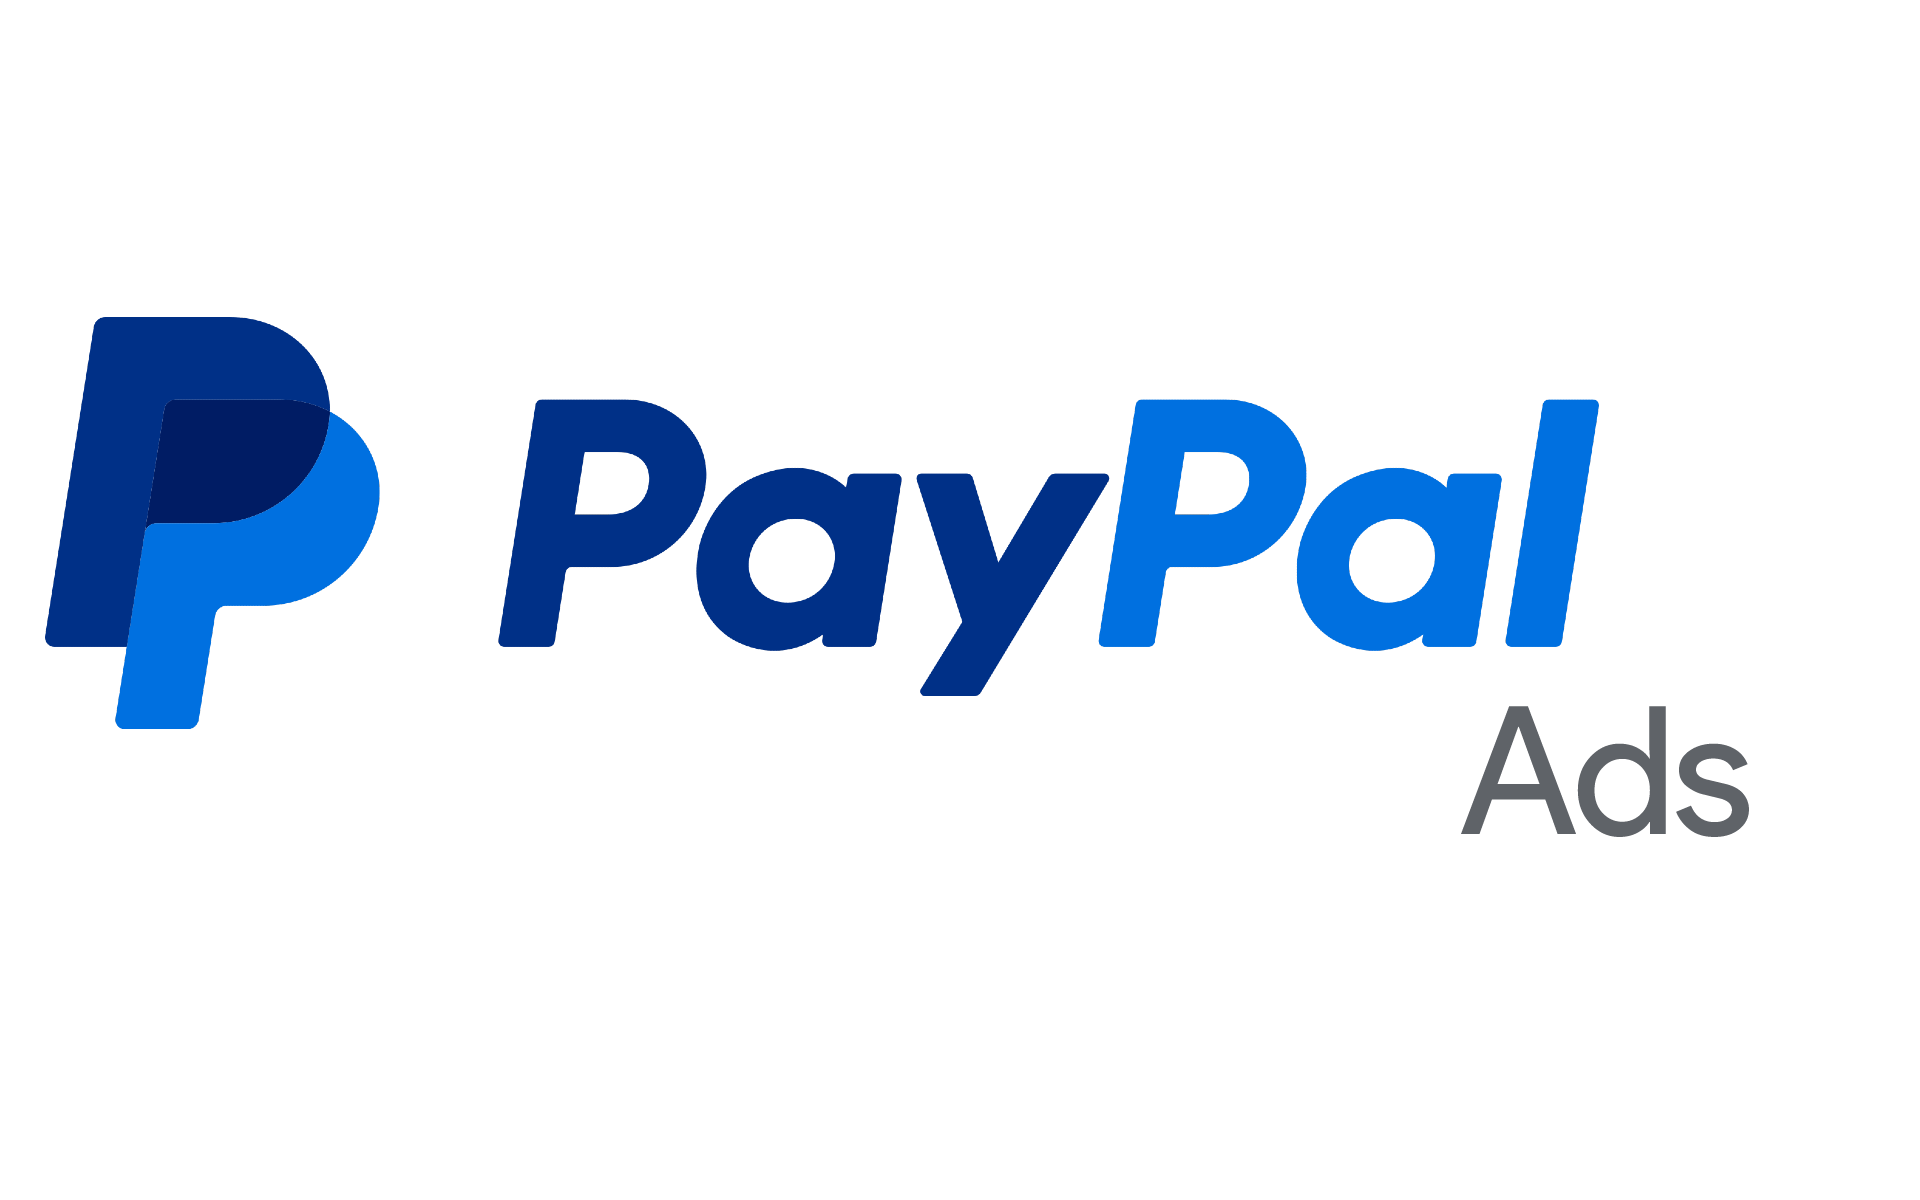 PayPal Ads